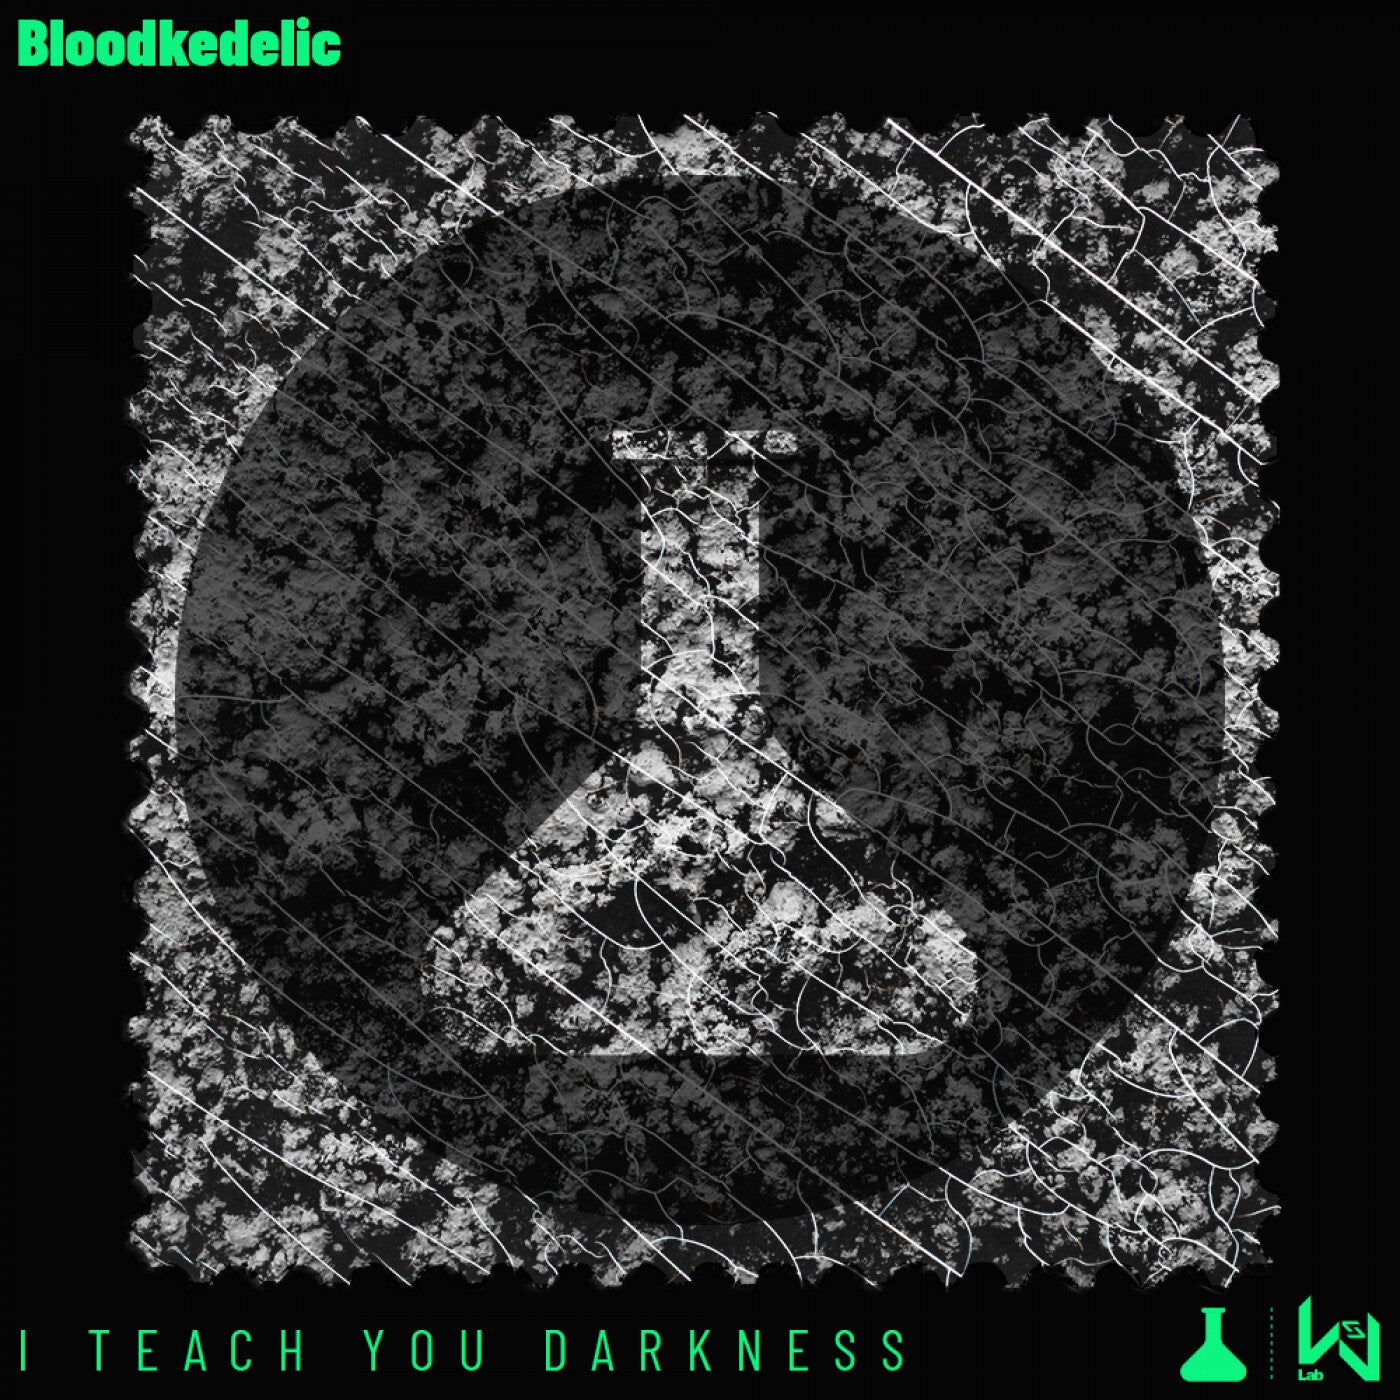 Bloodkedelic – I Teach You Darkness [WSL050]